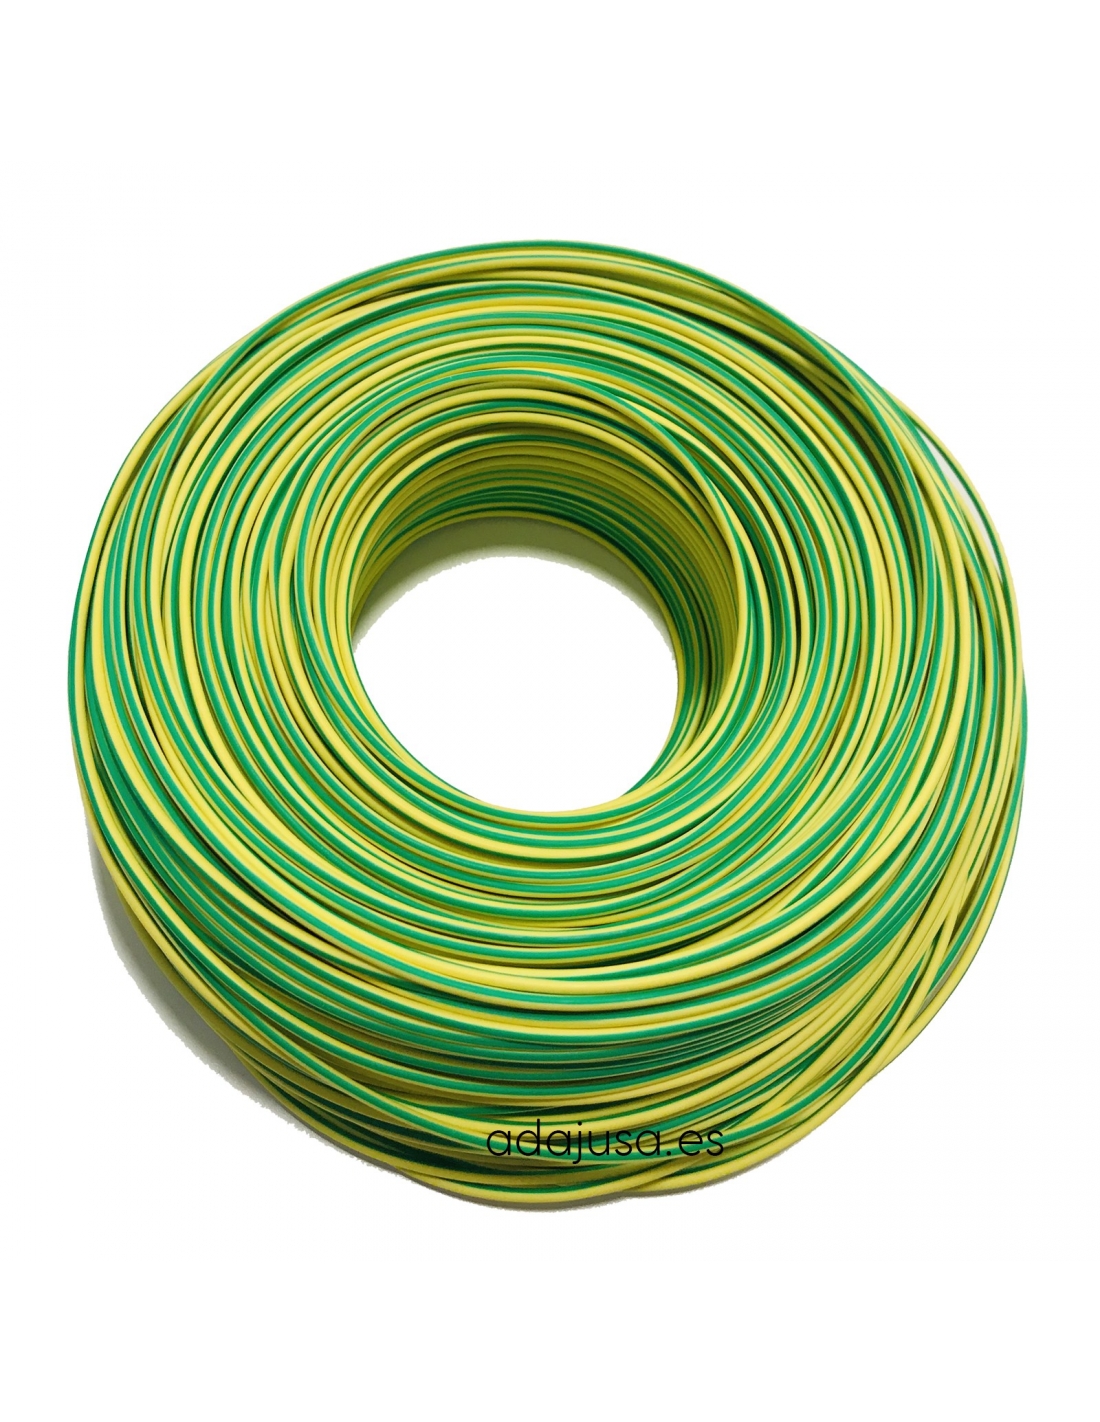 PVC EARTH GREEN YELLOW SLEEVING ELECTRICAL SOCKET LIGHTS WIRE CABLE 3,4,6mm 